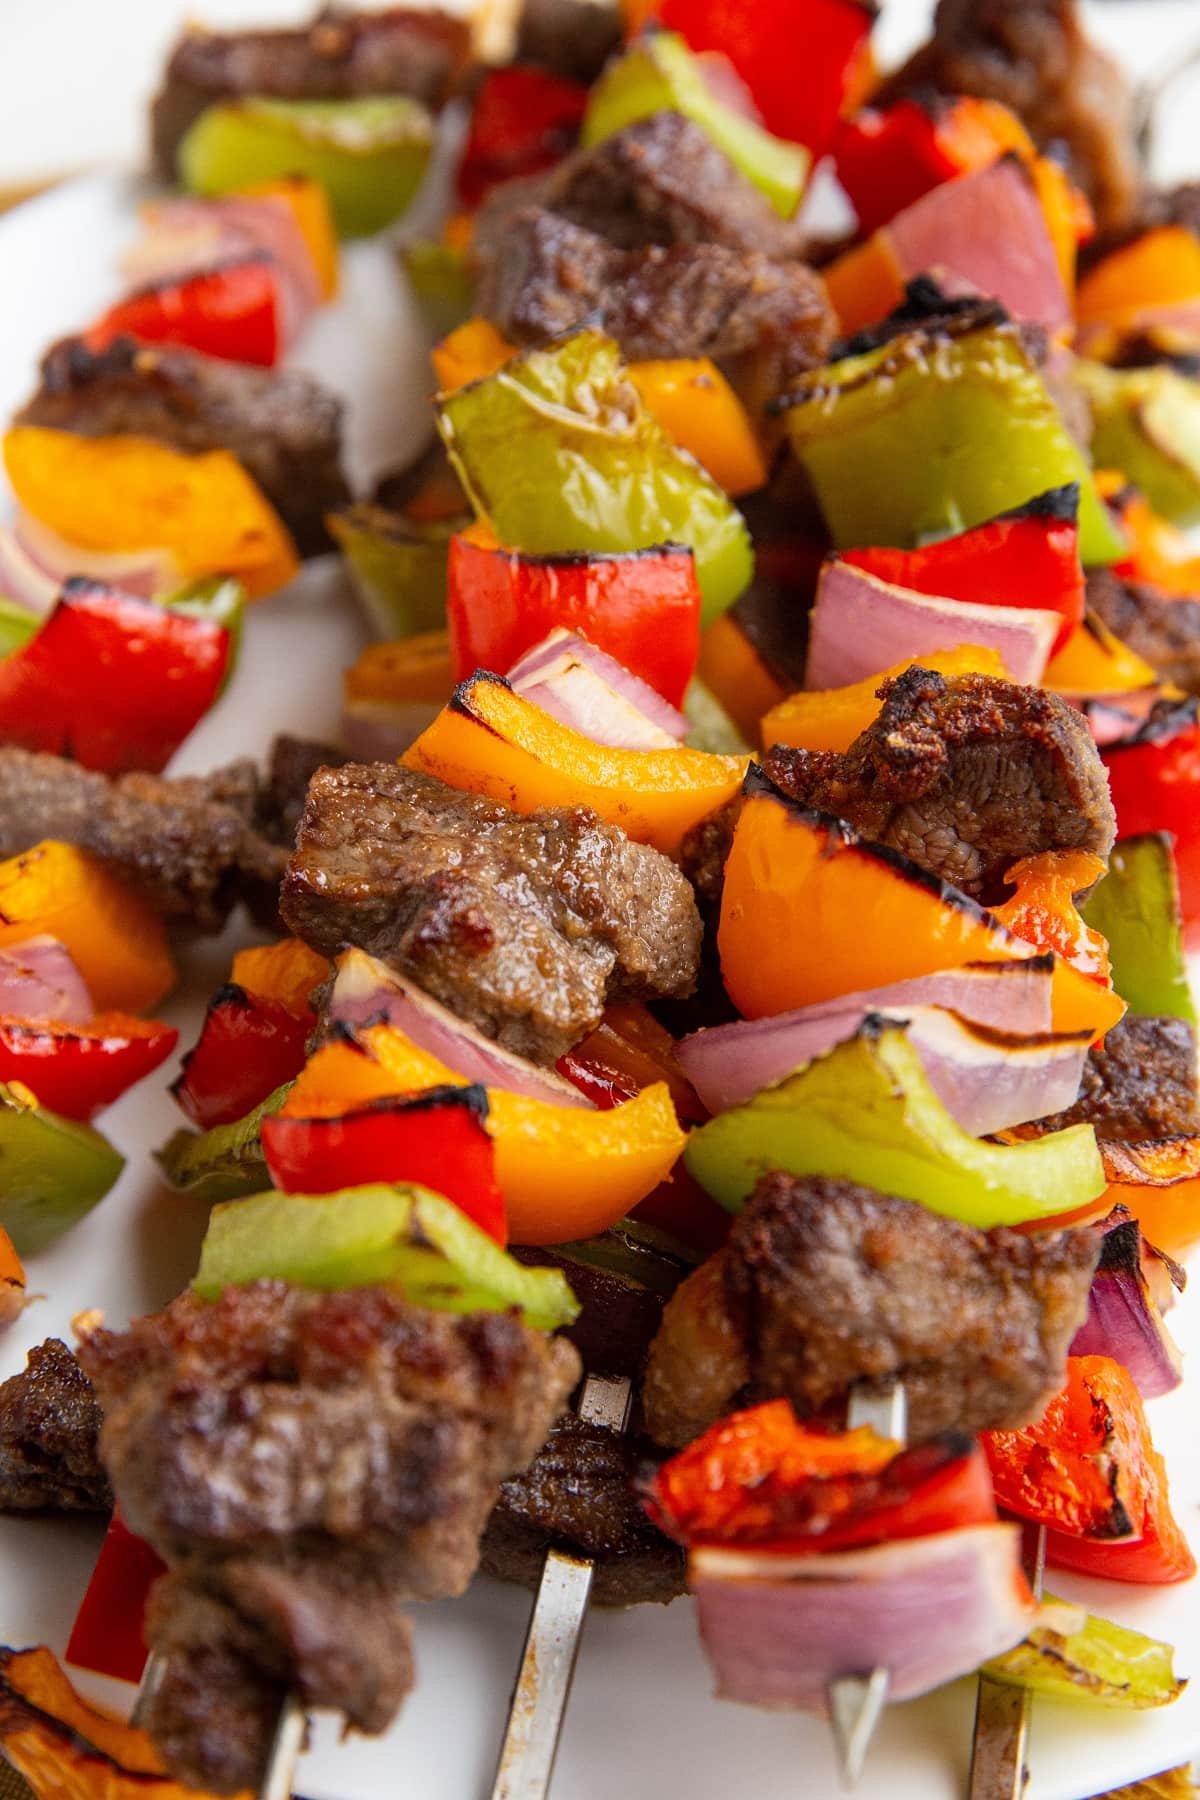 18 Kebab Recipes for the Grill